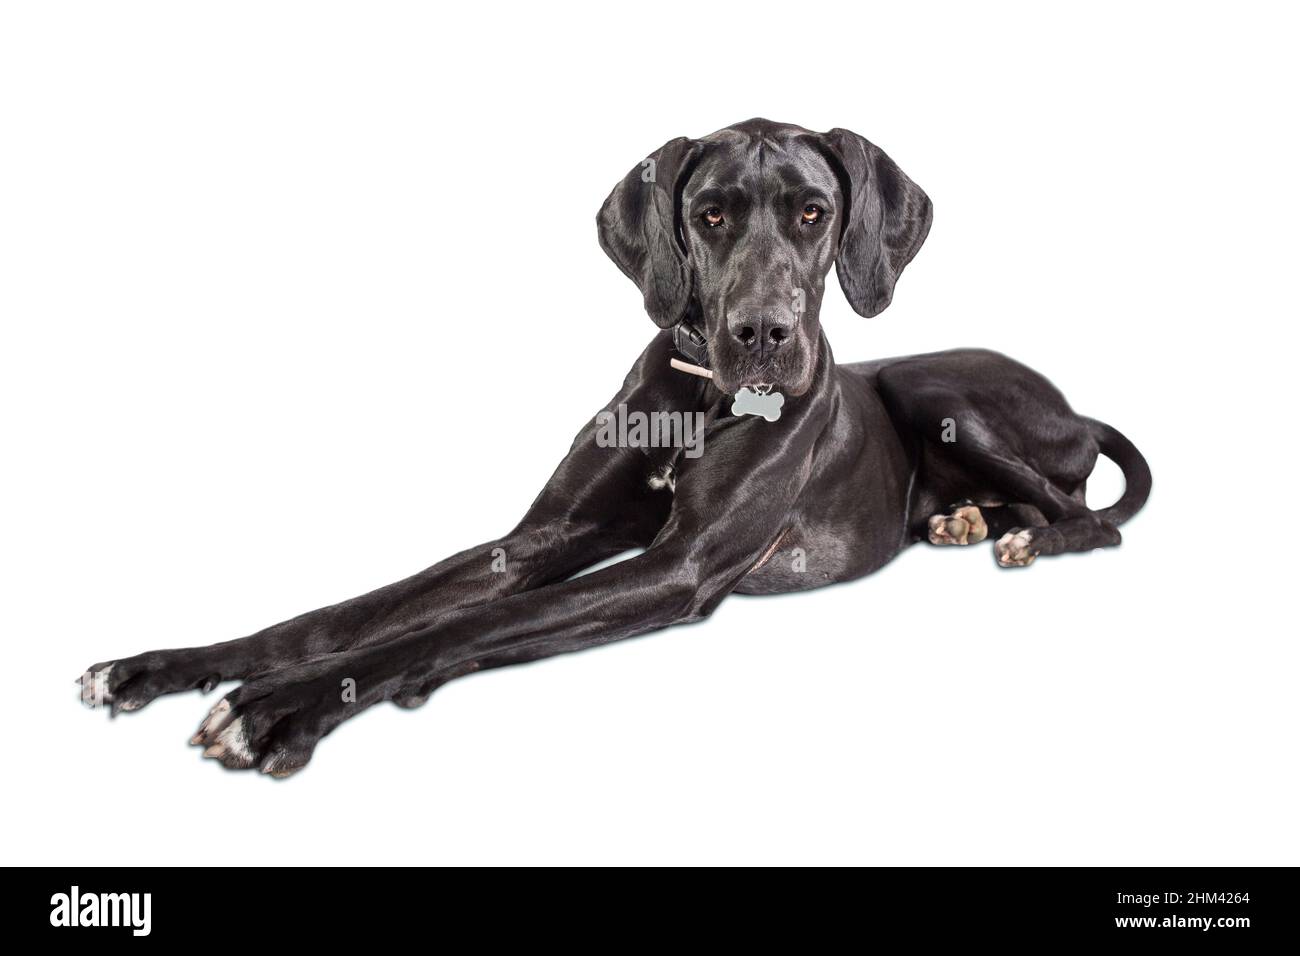 Great Dane dog portrait, one of the largest breeds in the world. Black young female. Isolated over white background Stock Photo